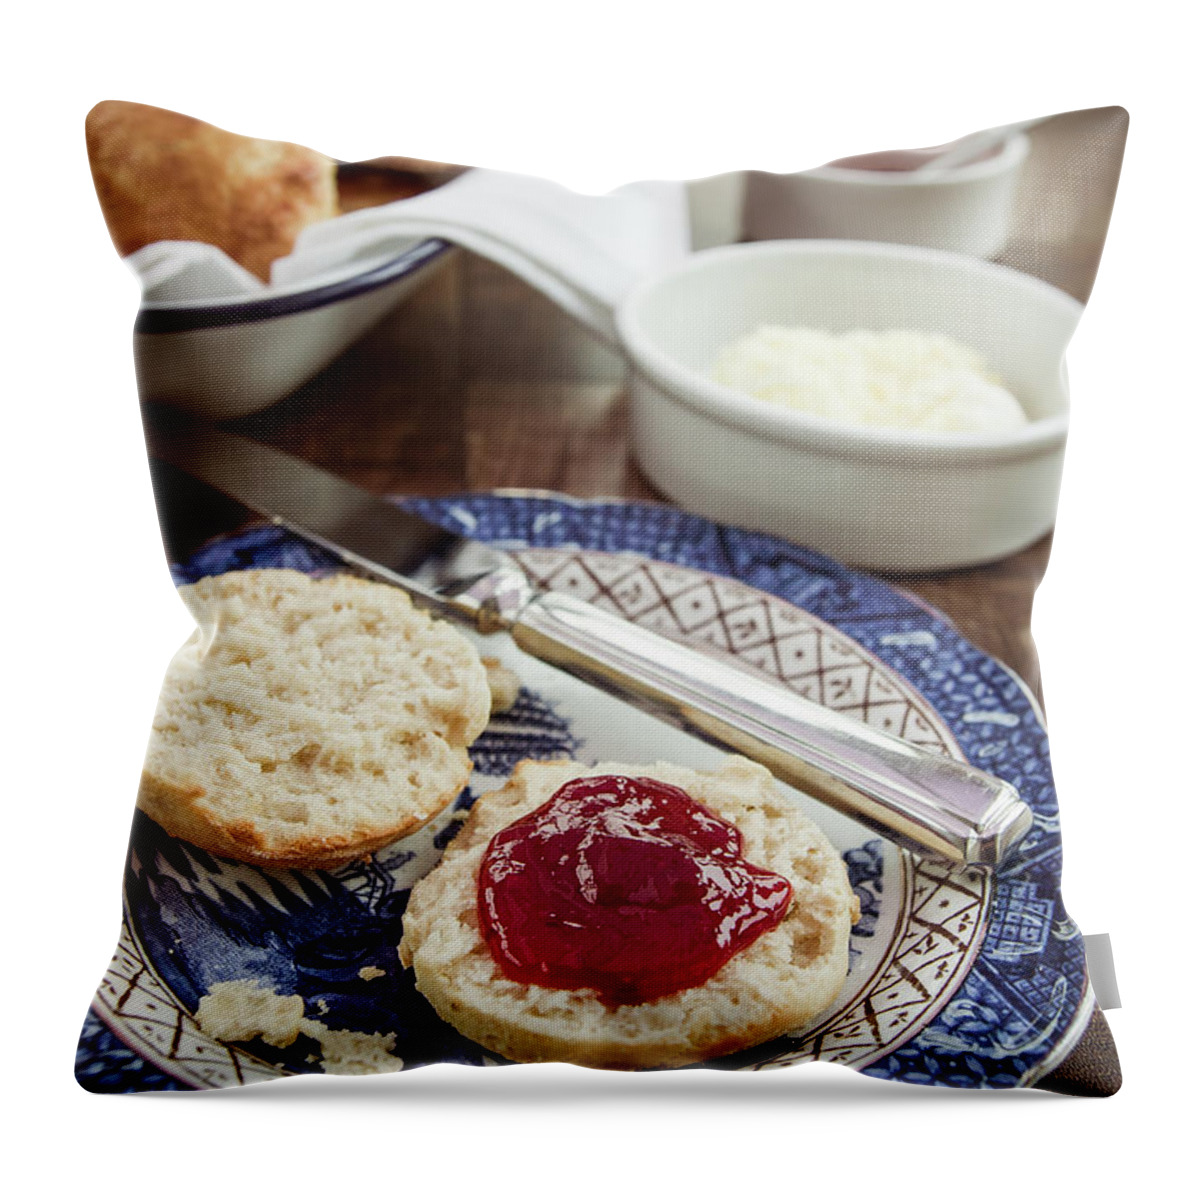 Breakfast Throw Pillow featuring the photograph Cream Tea - Freshly Baked by Ruth Hornby Photography